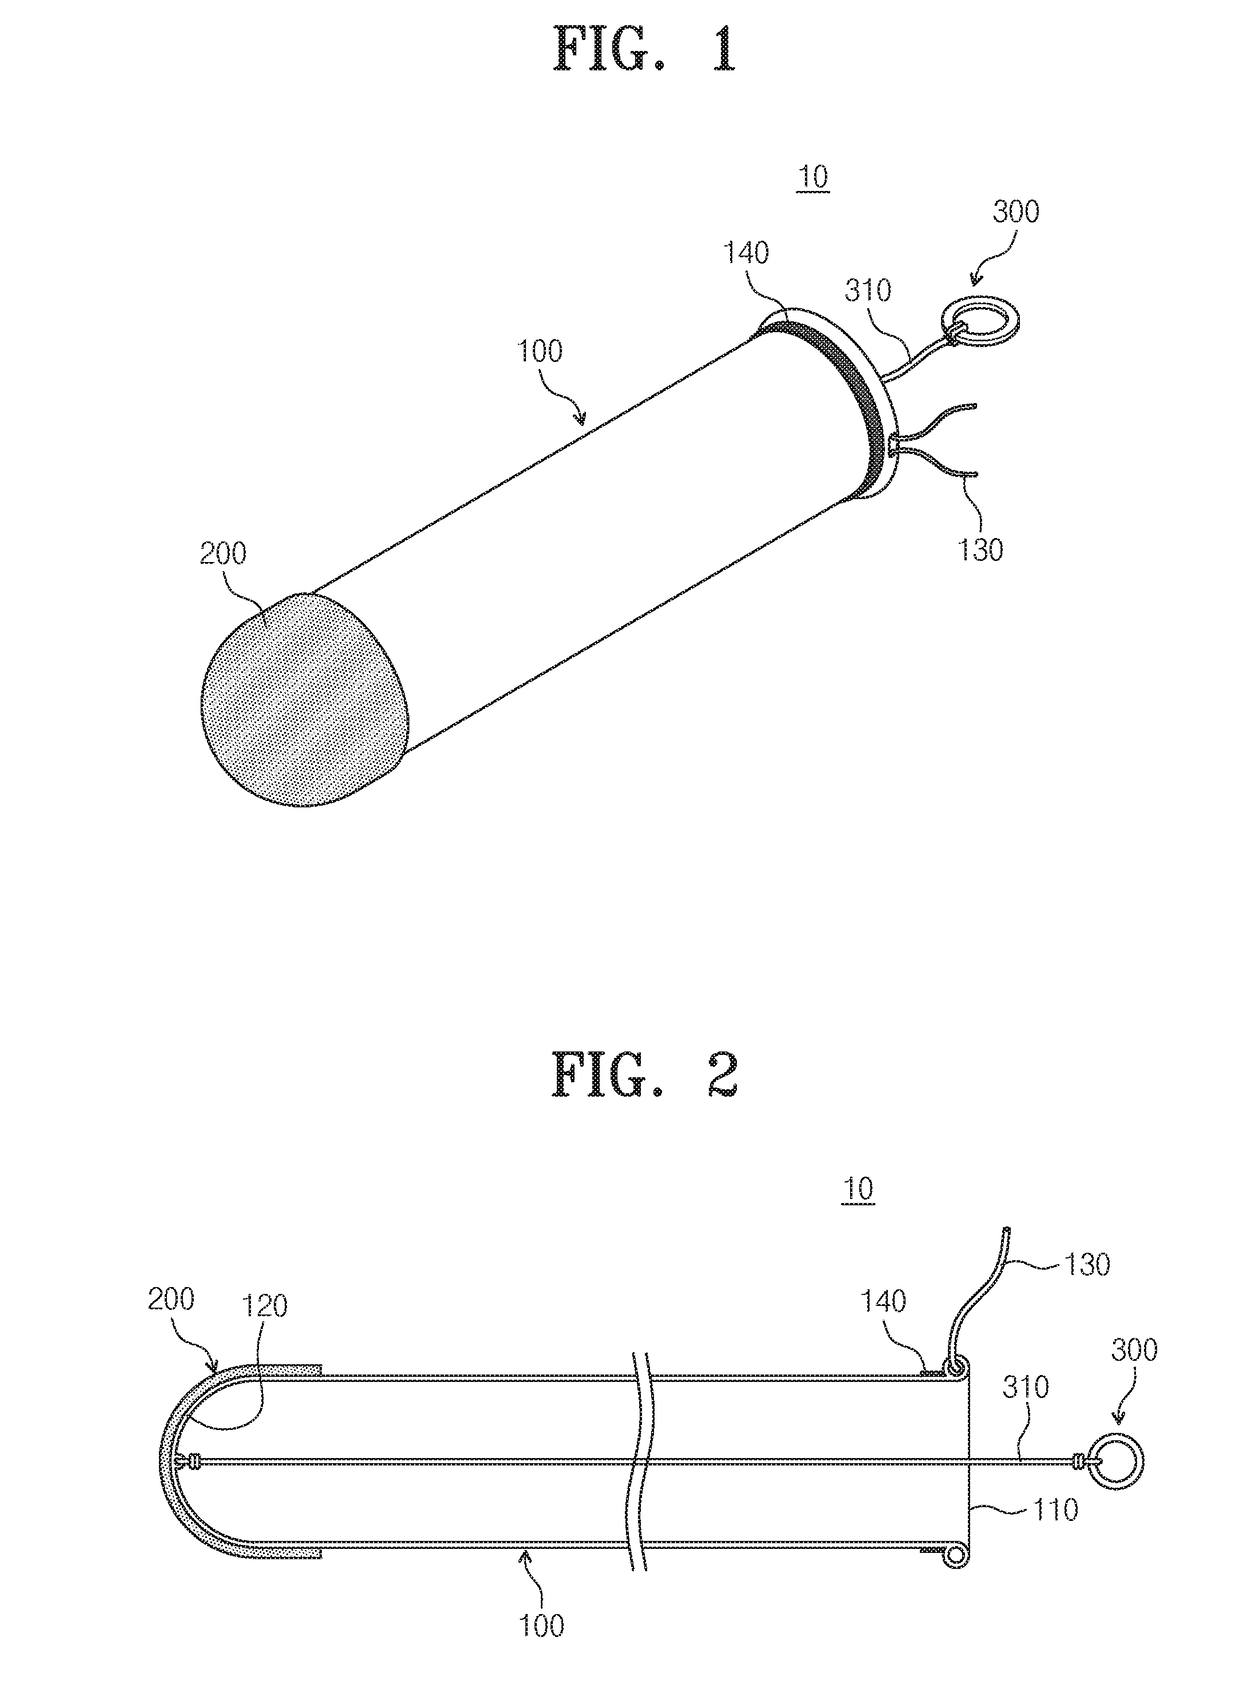 Method and apparatus for self-collecting intravaginal sample for HPV test